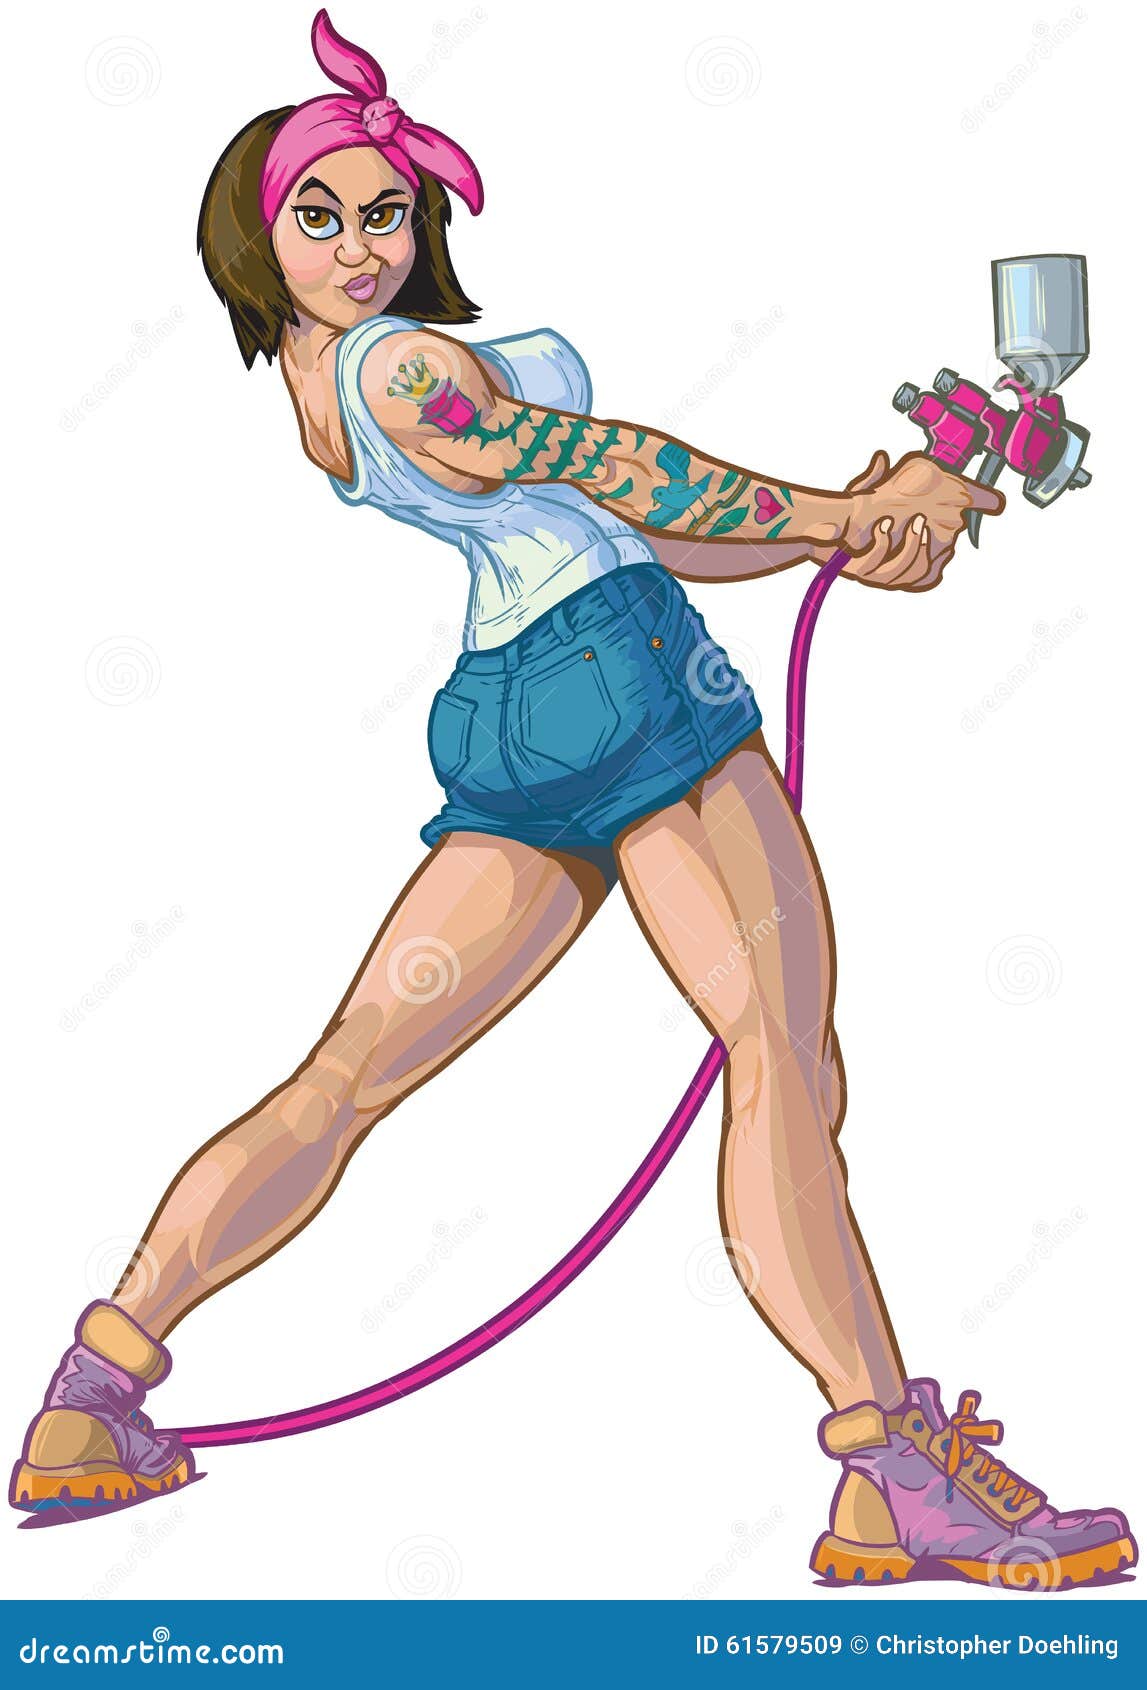 clipart pin up girl - photo #22